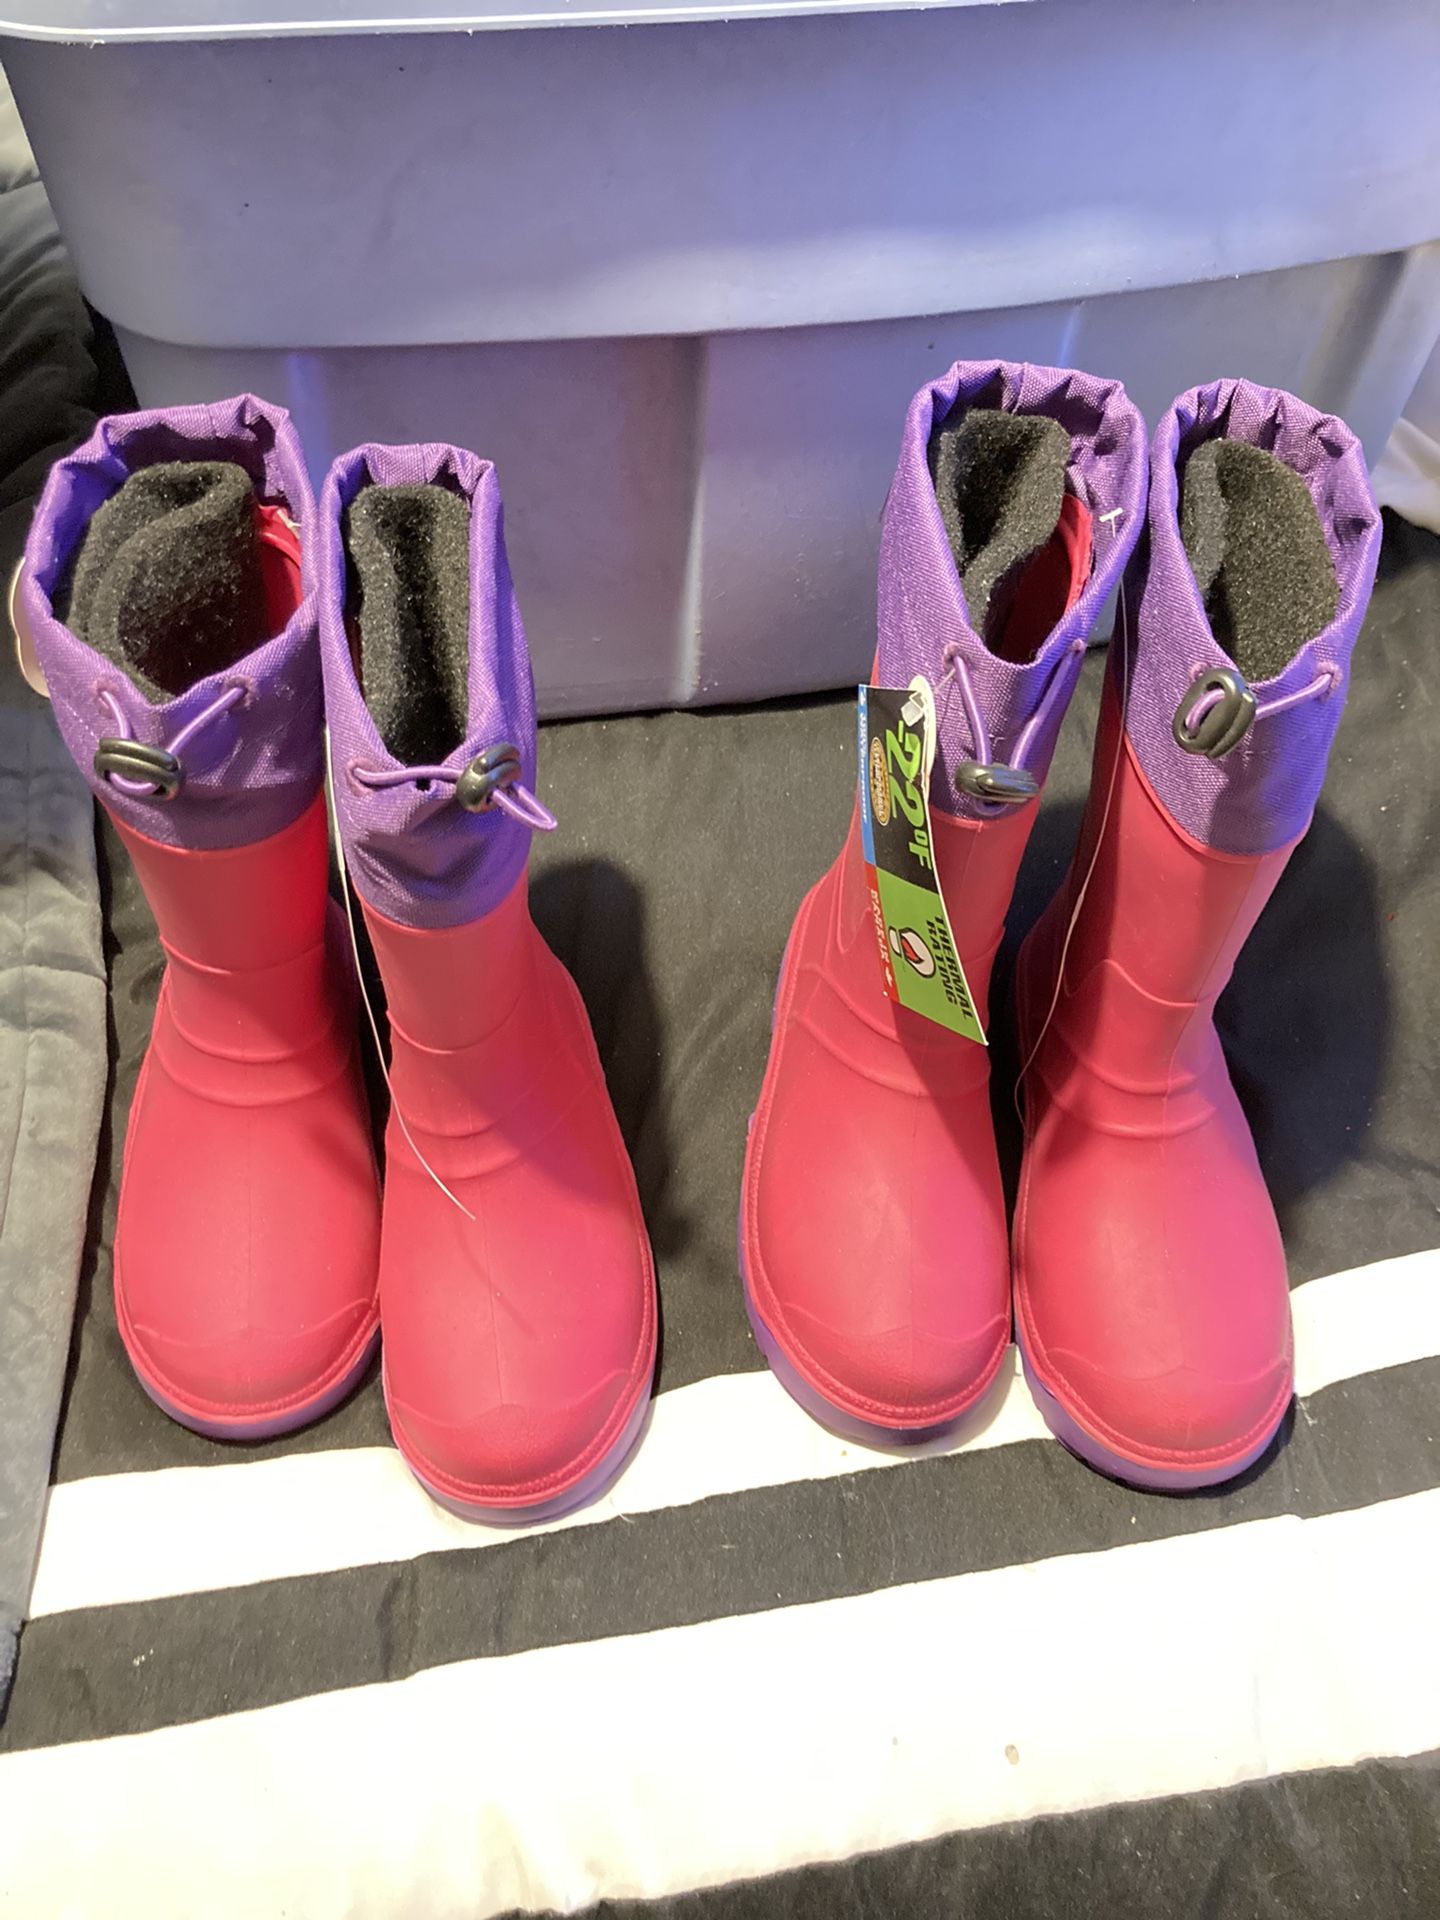 Brand new girls insulated waterproof snow boots